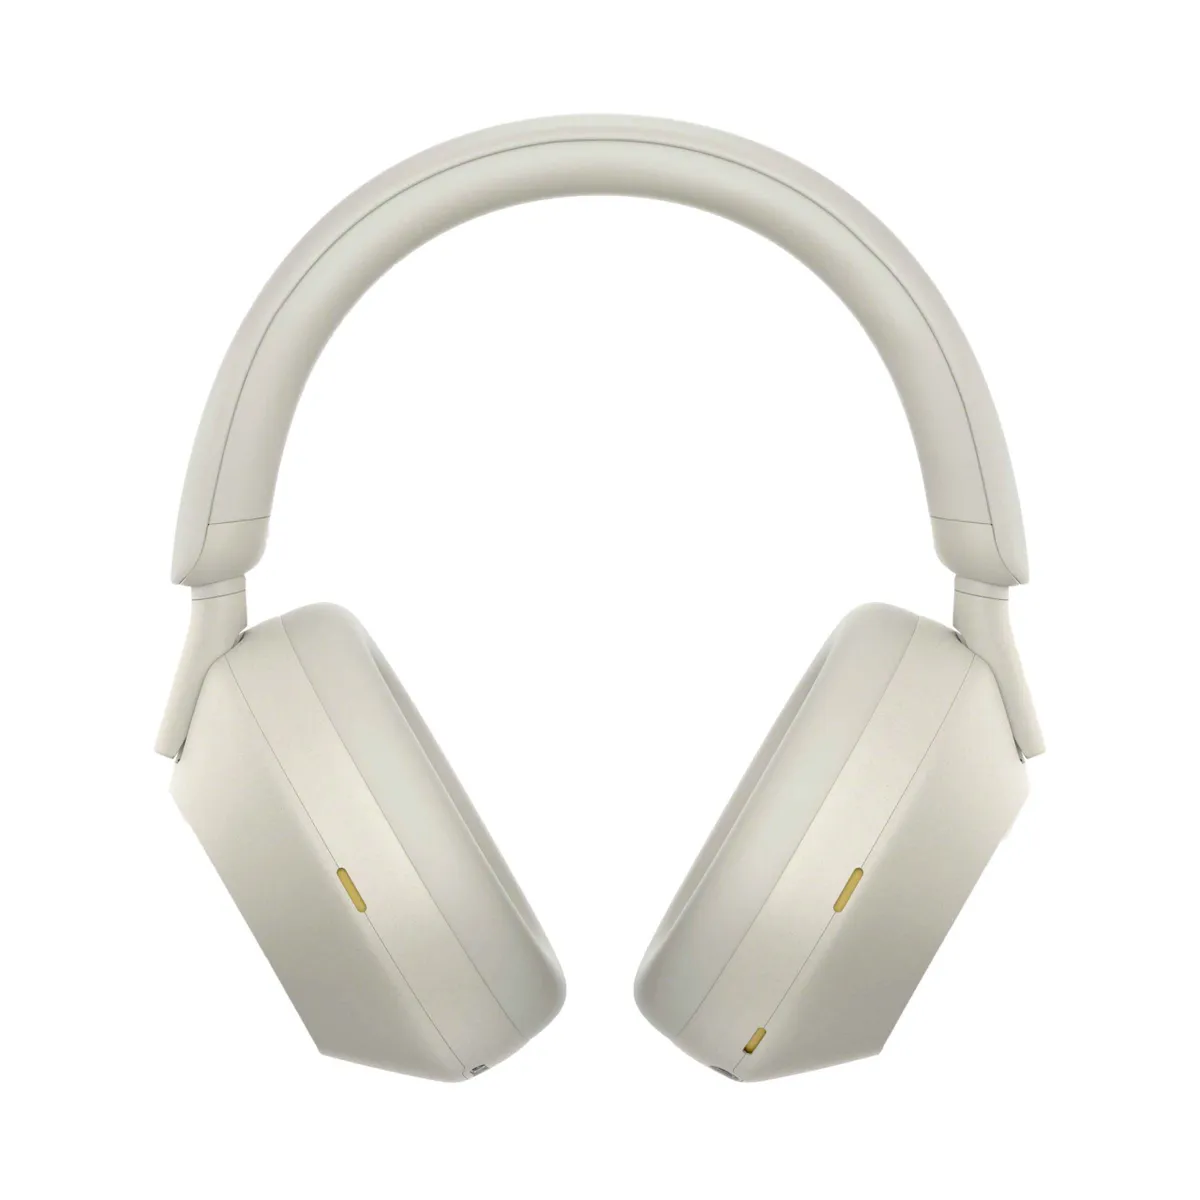 The Sony WH-1000XM5 in white